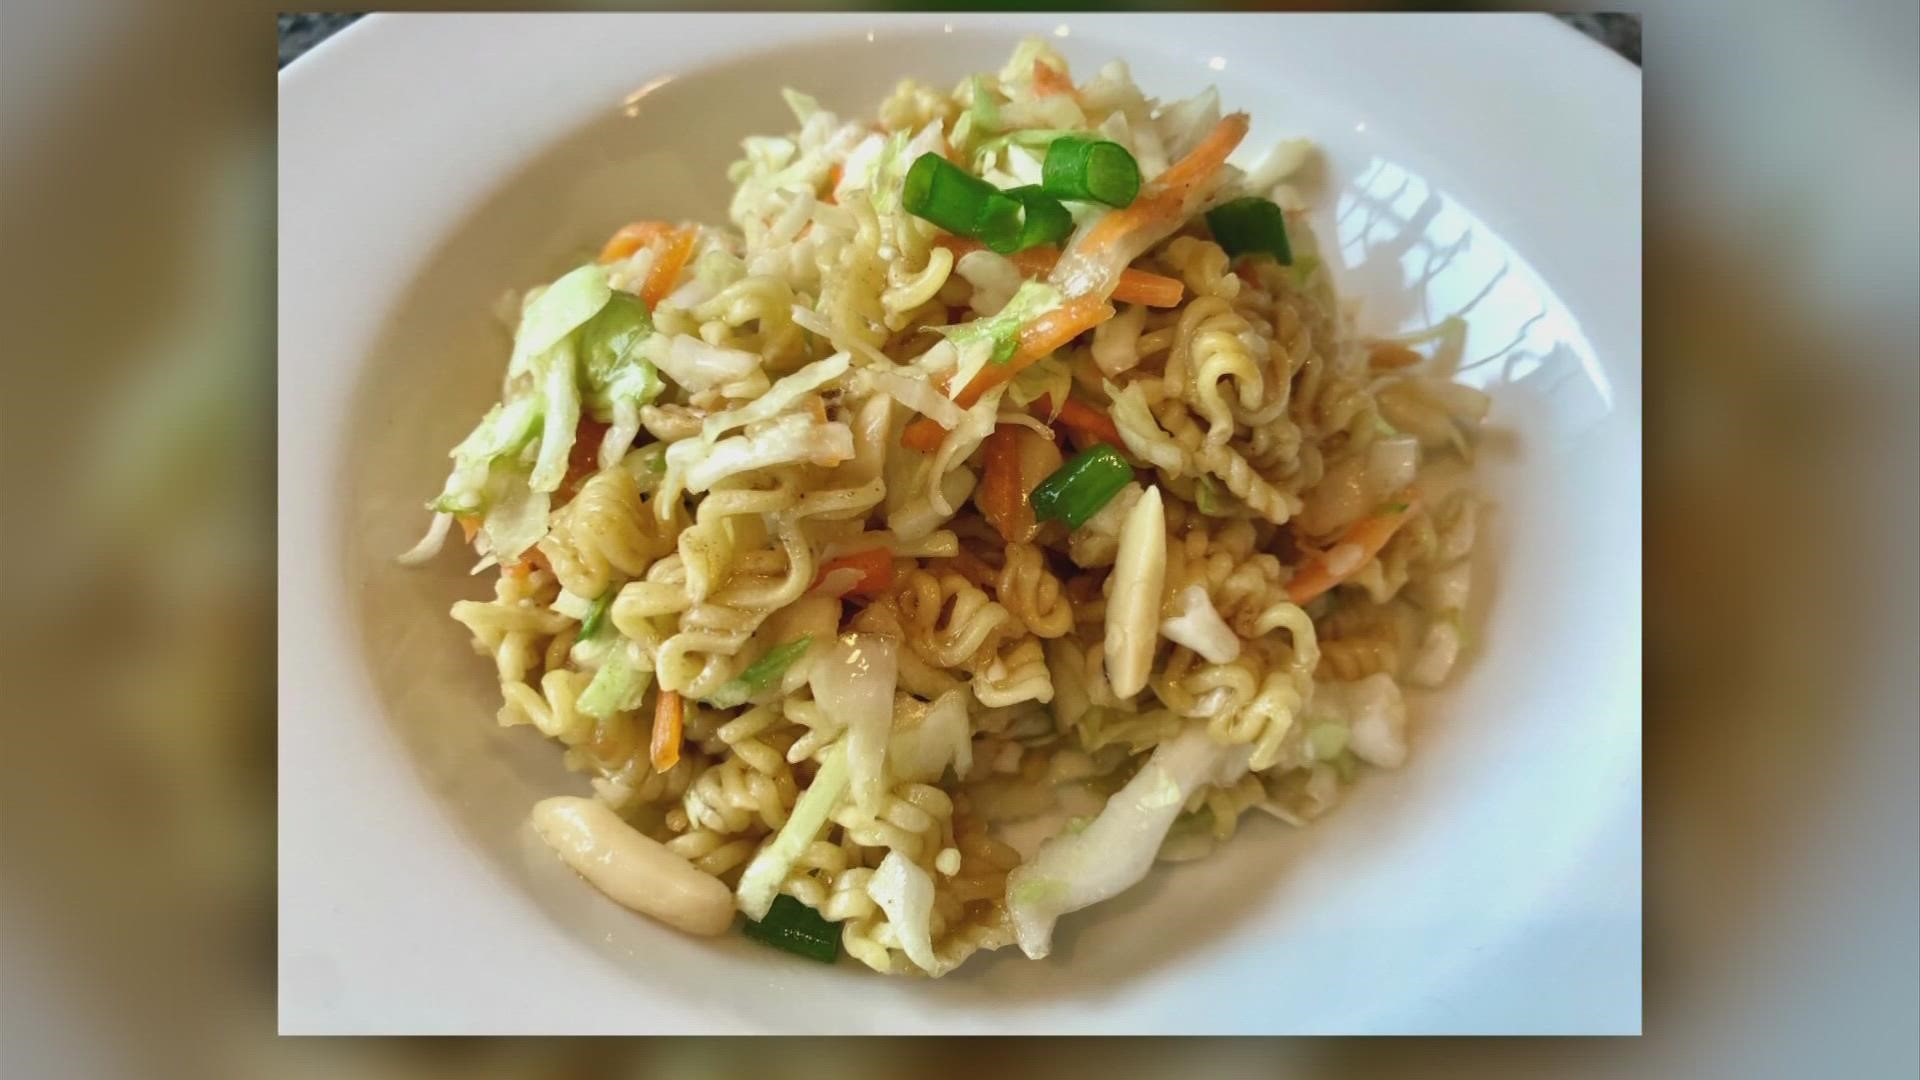 A viewer shared their recipe that will help get you to eat more vegetables.